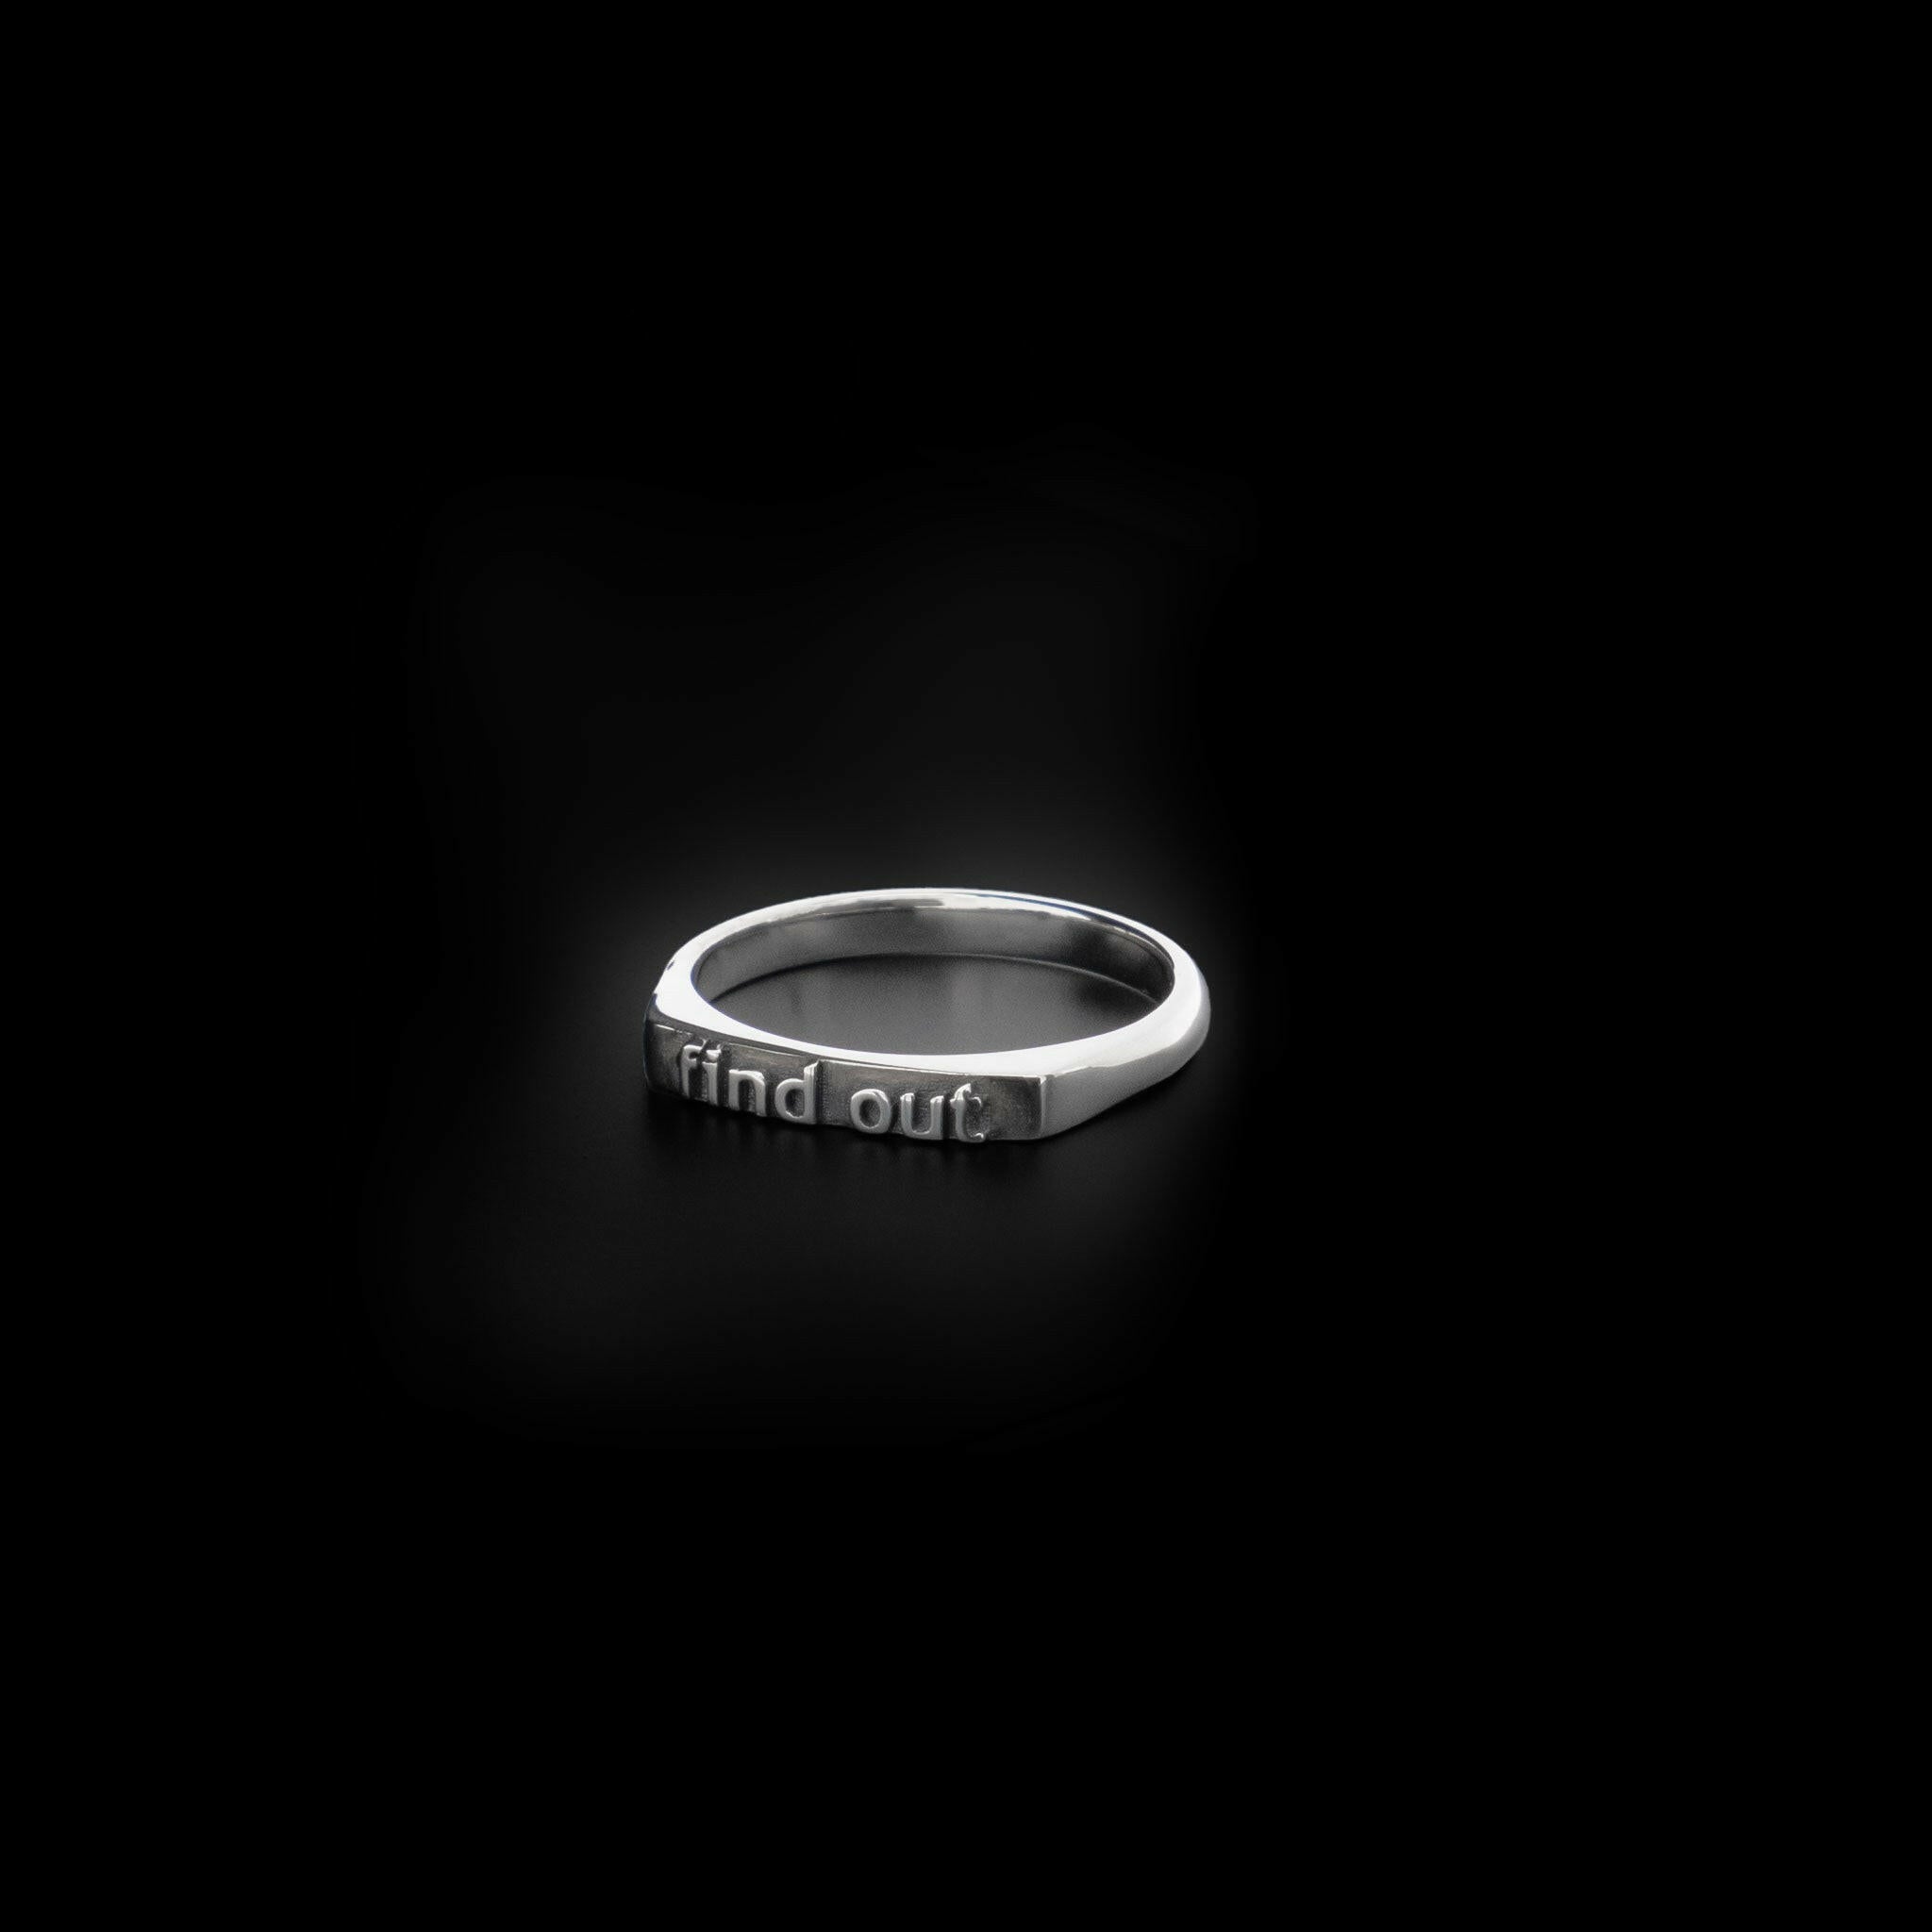 right angle view of a sterling silver ring with text reading "find out"